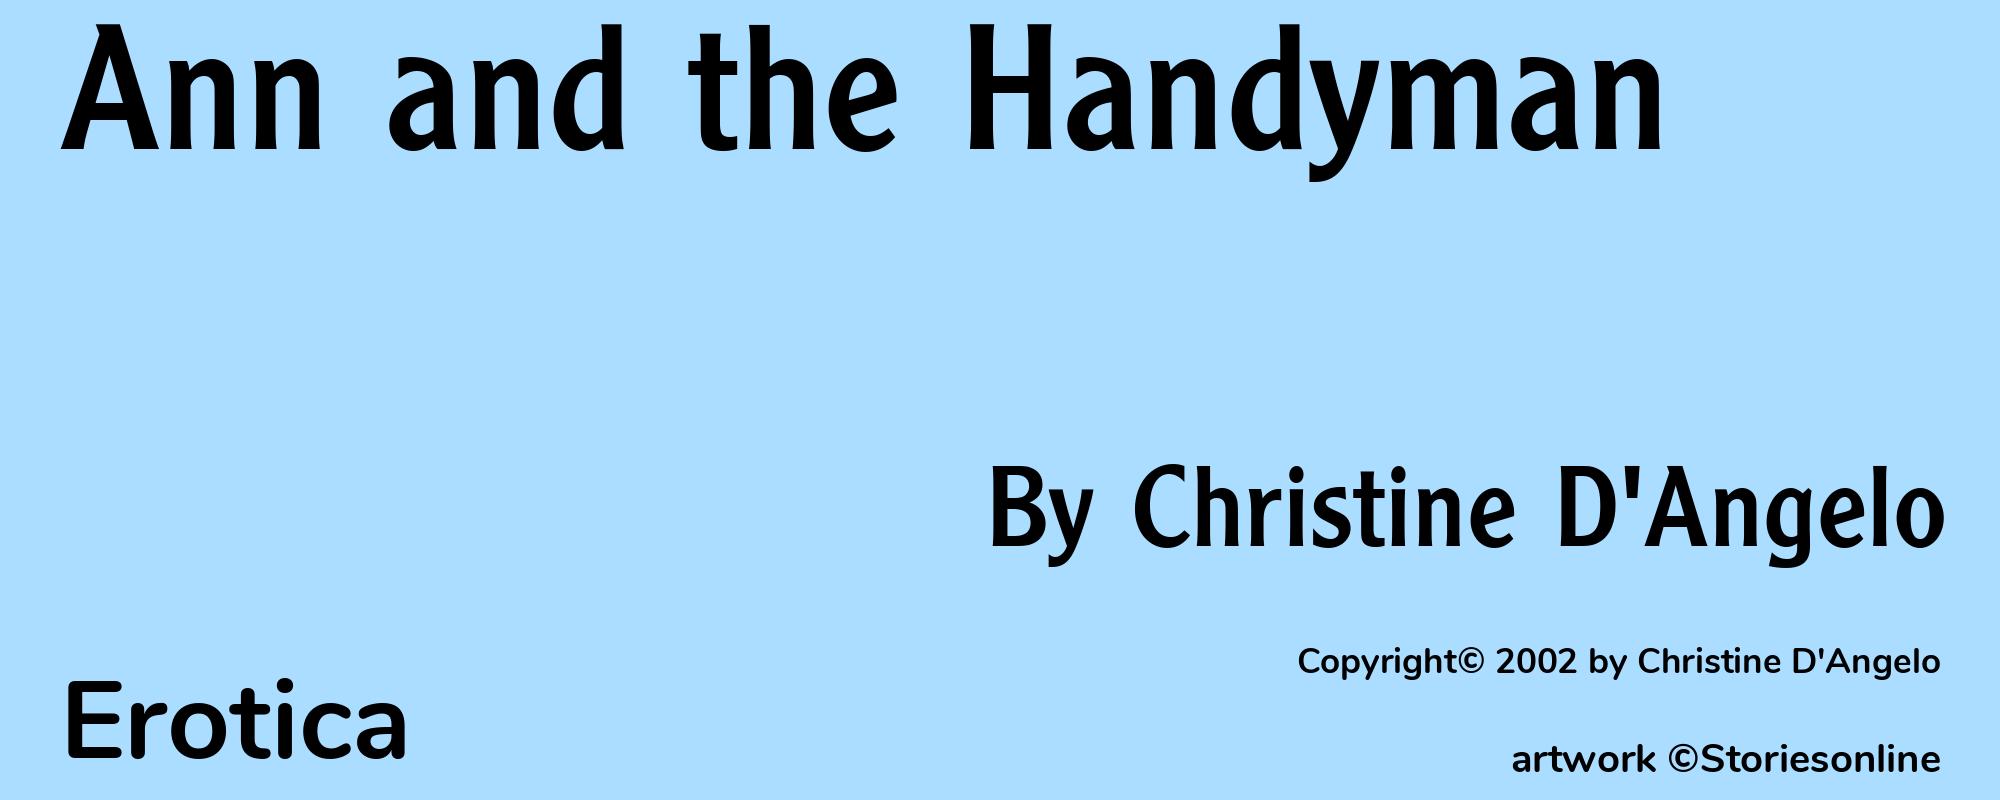 Ann and the Handyman - Cover